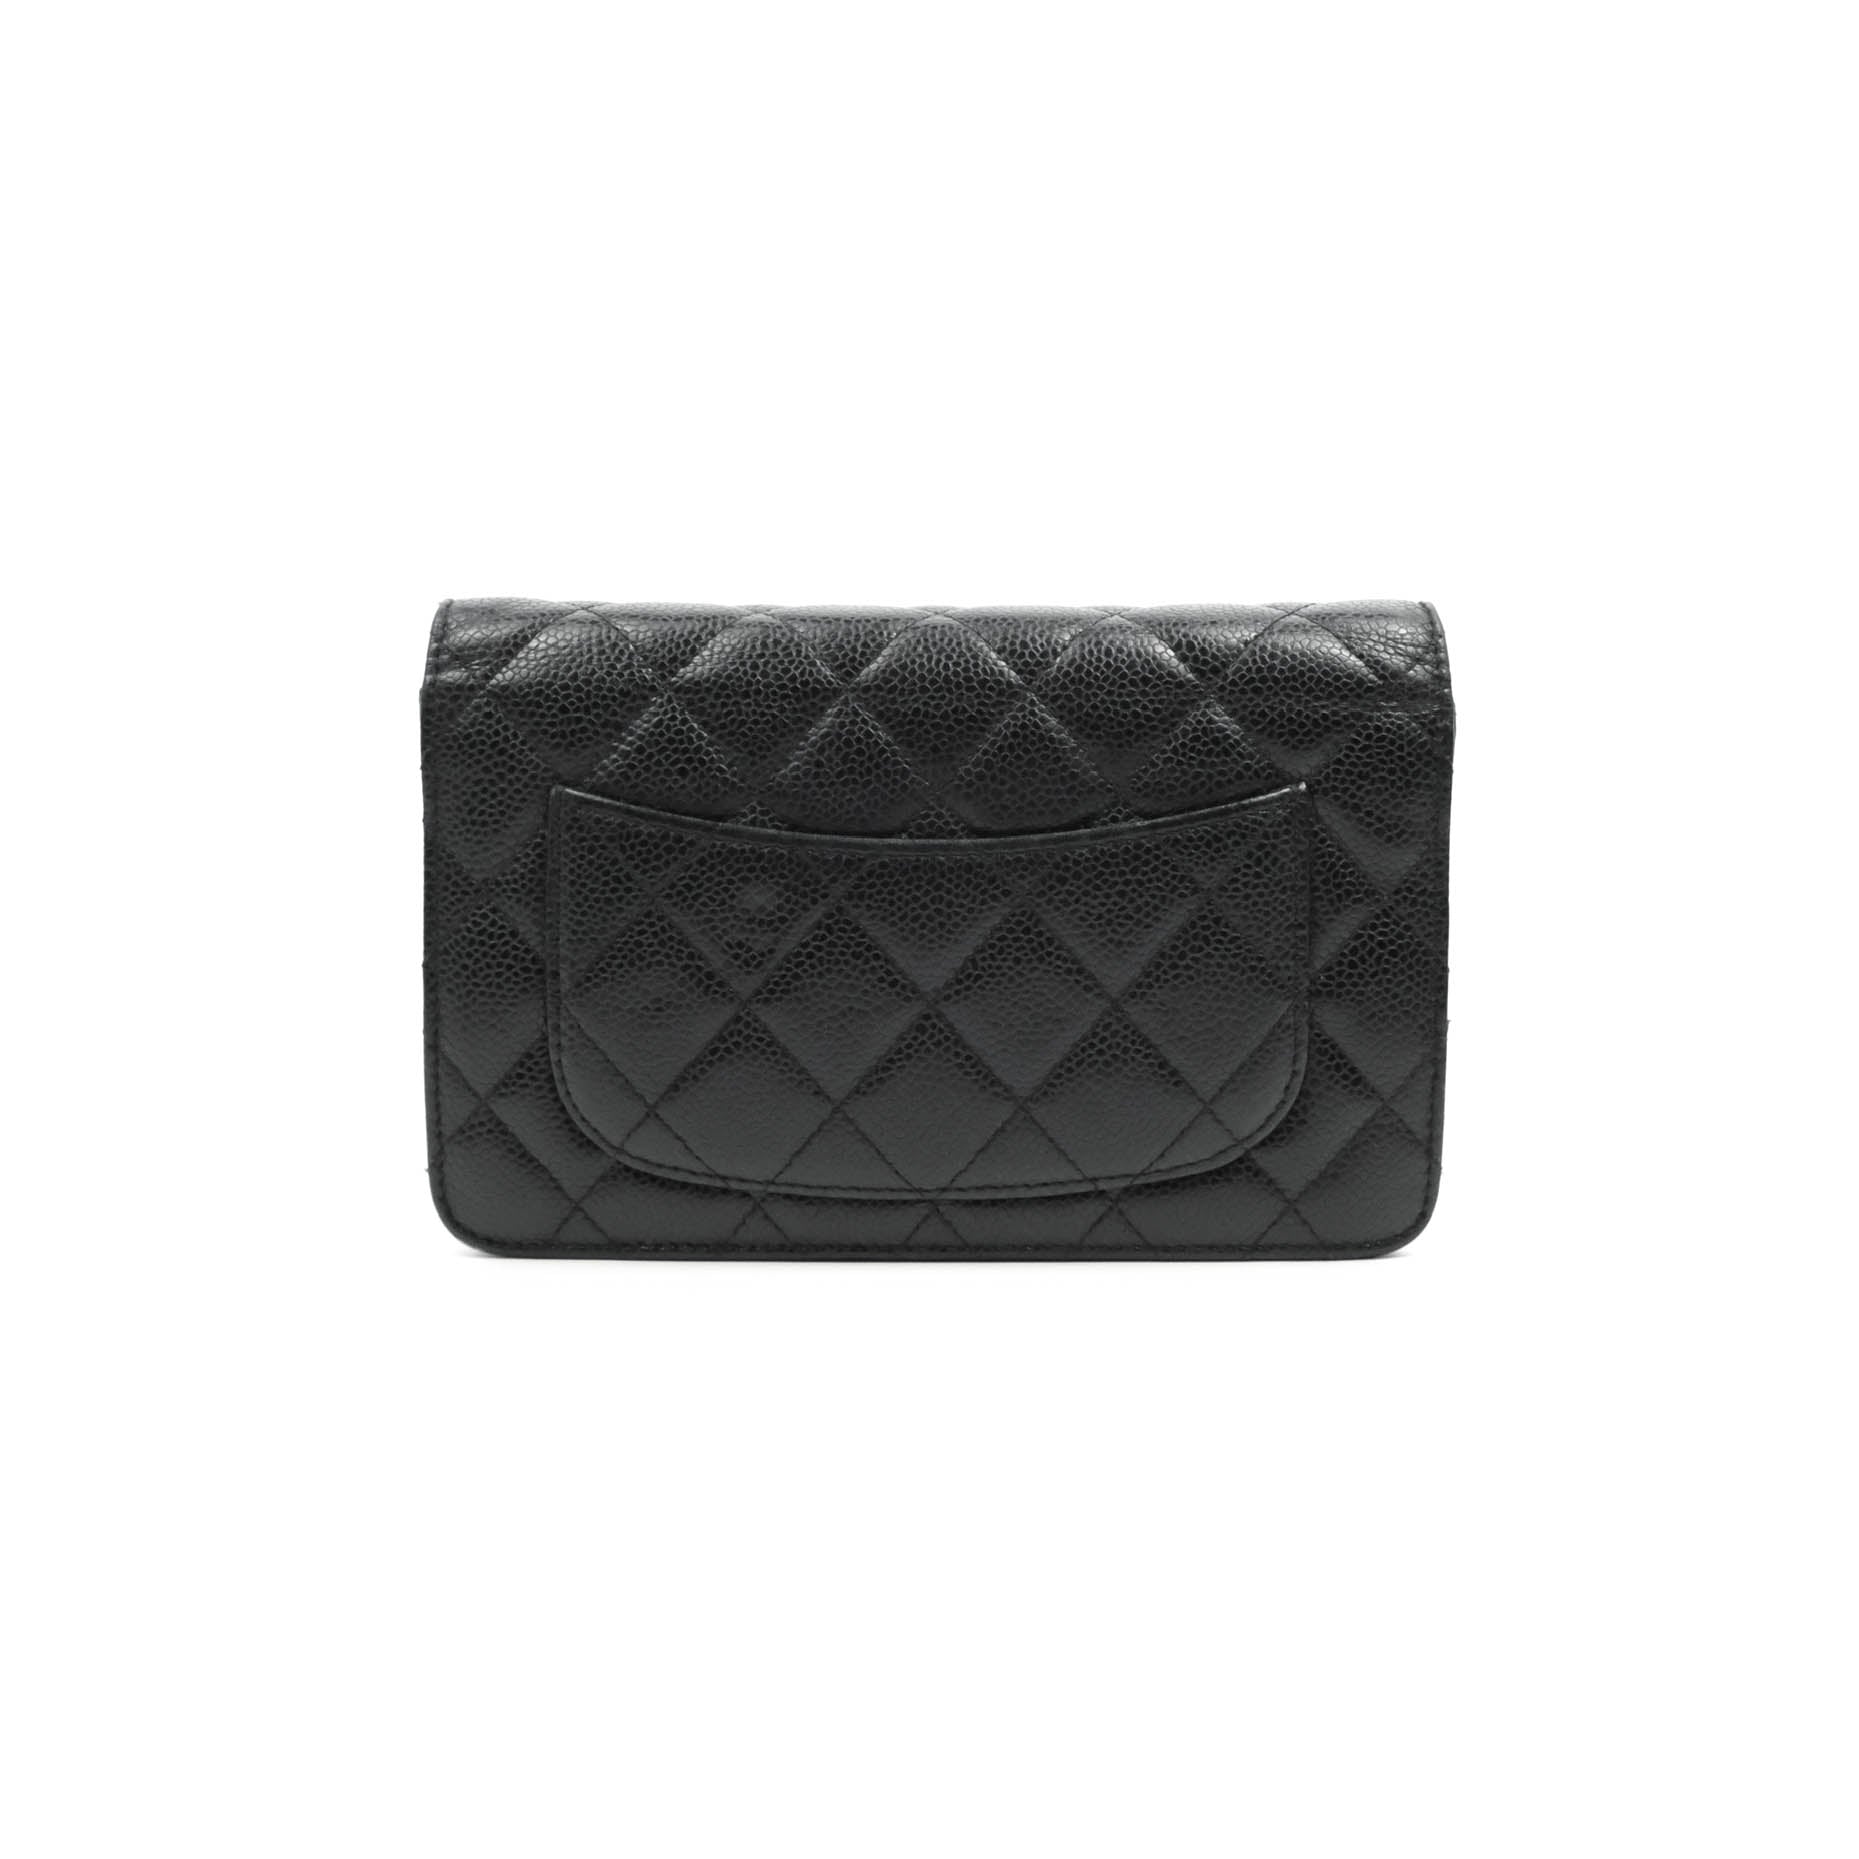 WOC Wallet on Chain, Quilted Caviar - Black w/ Gold – collapsit